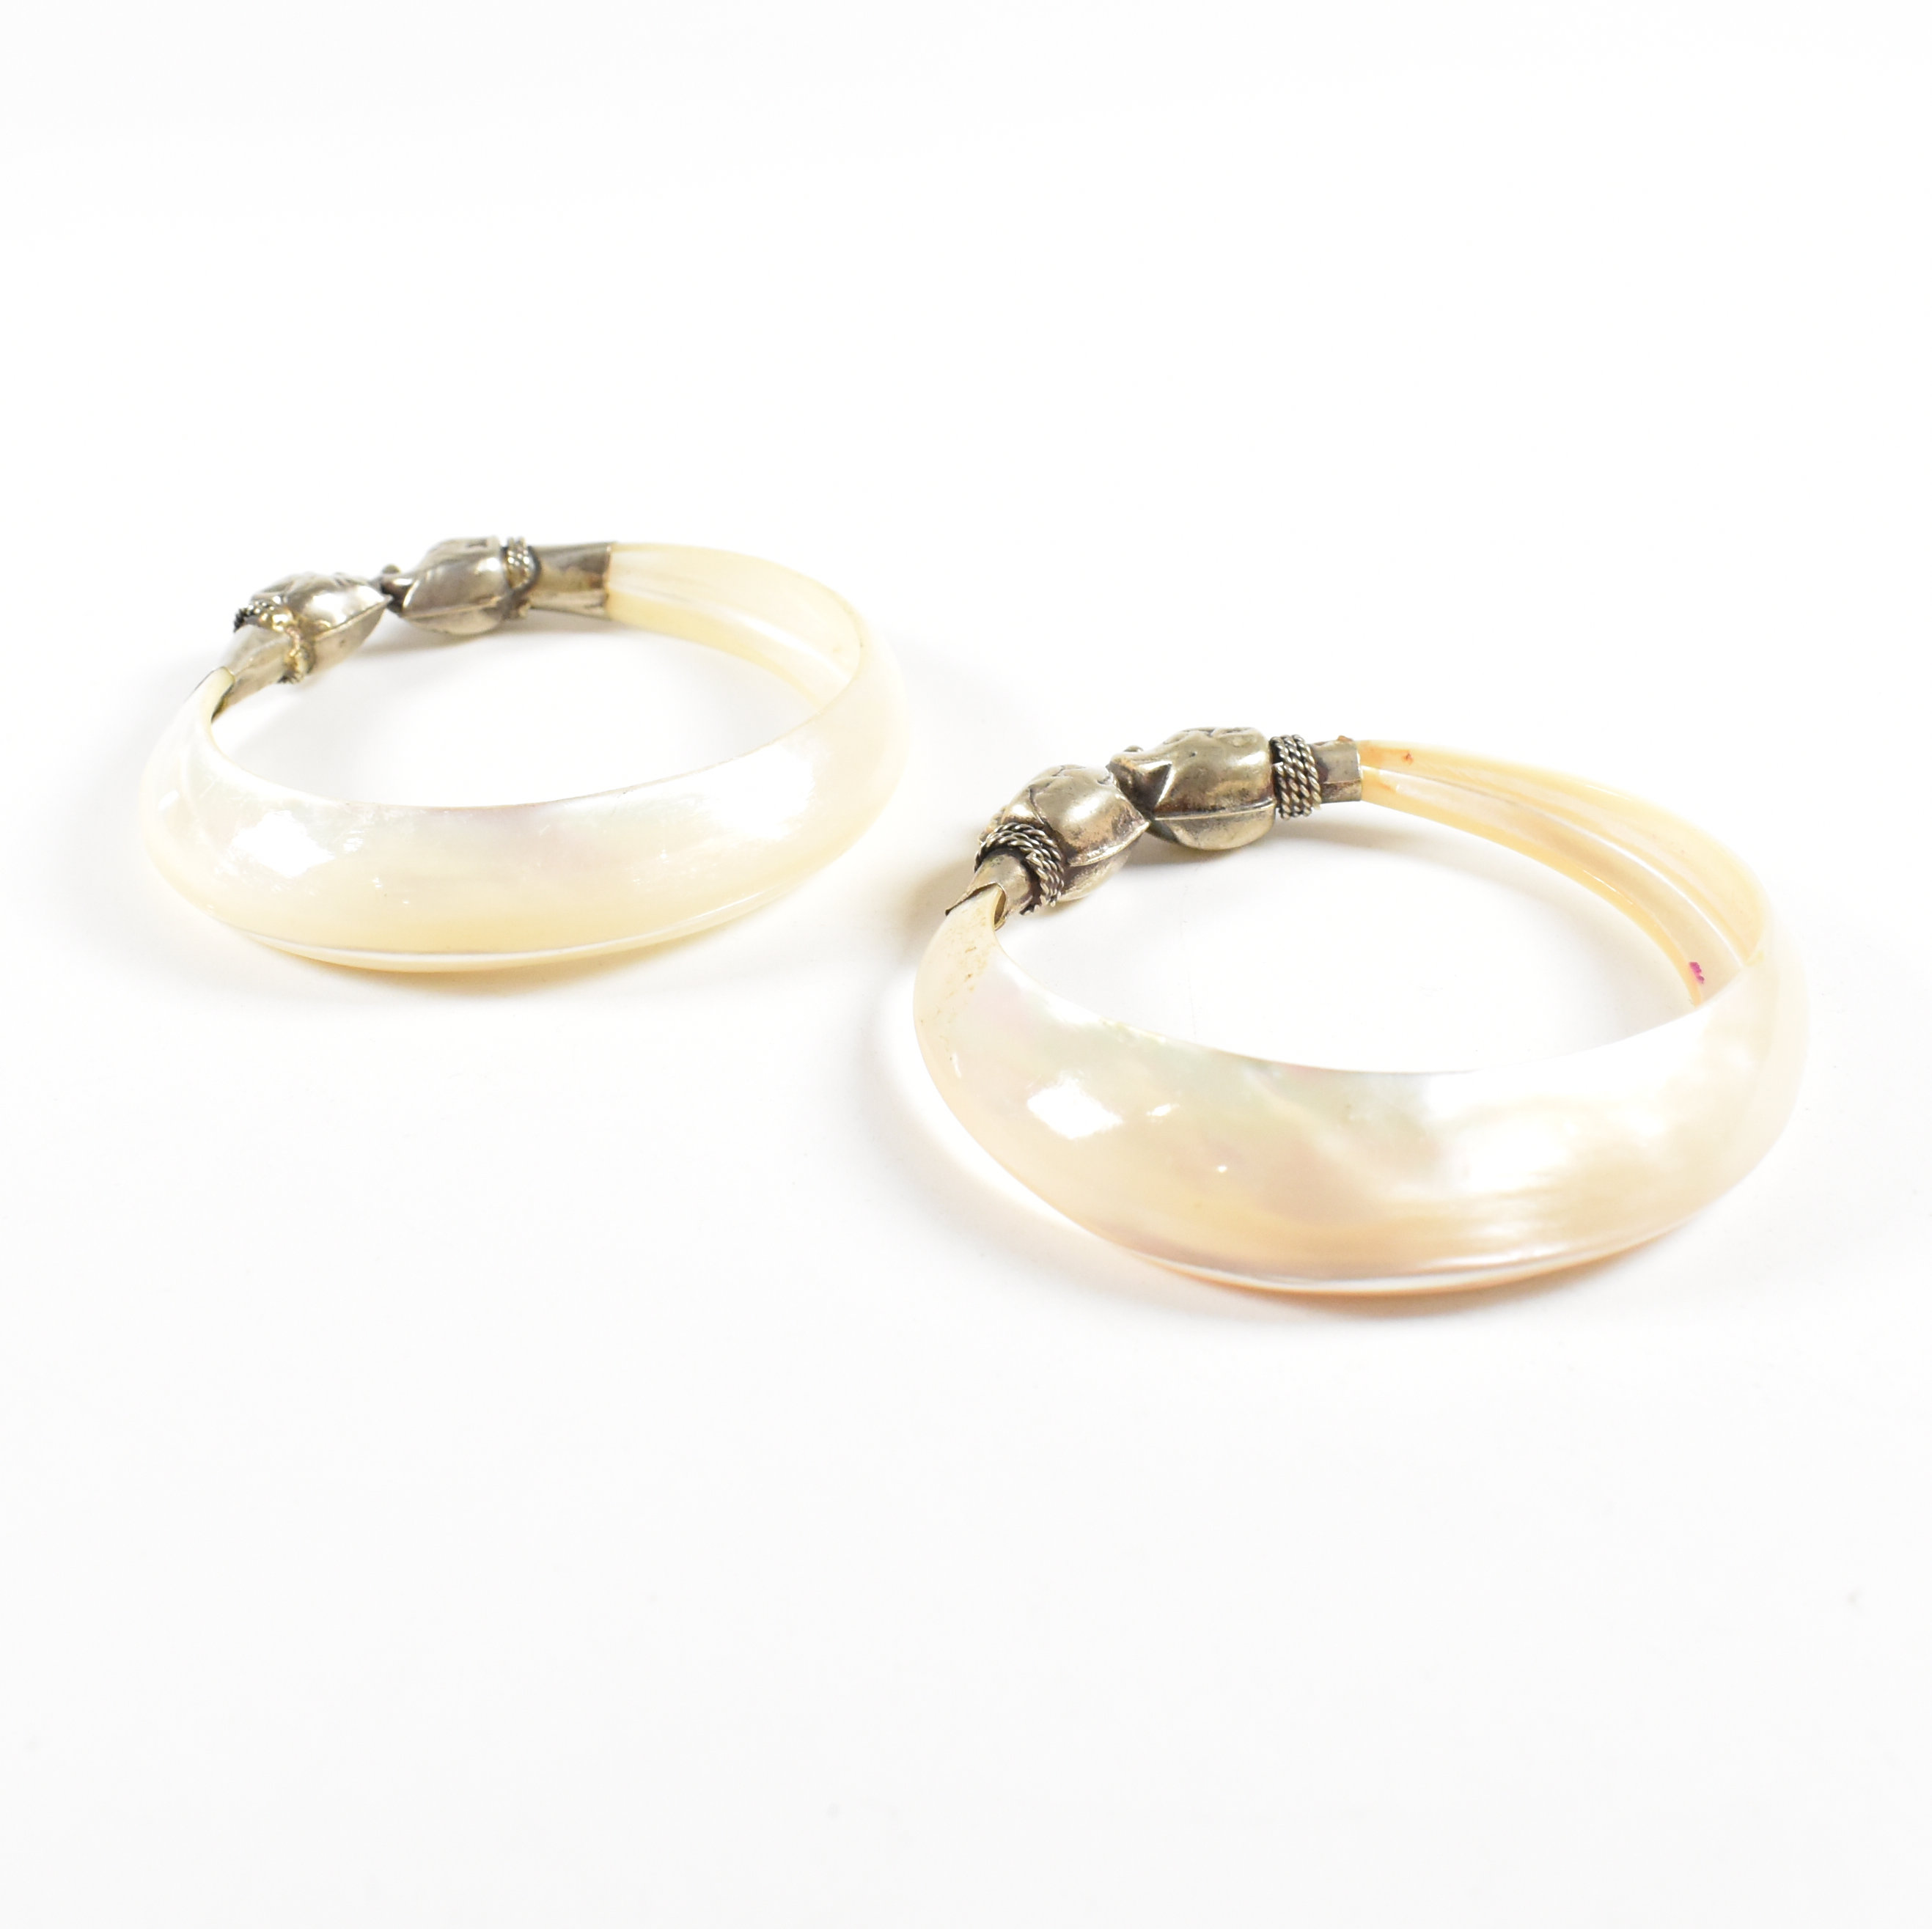 PAIR OF MOTHER OF PEARL BANGLES - Image 3 of 9